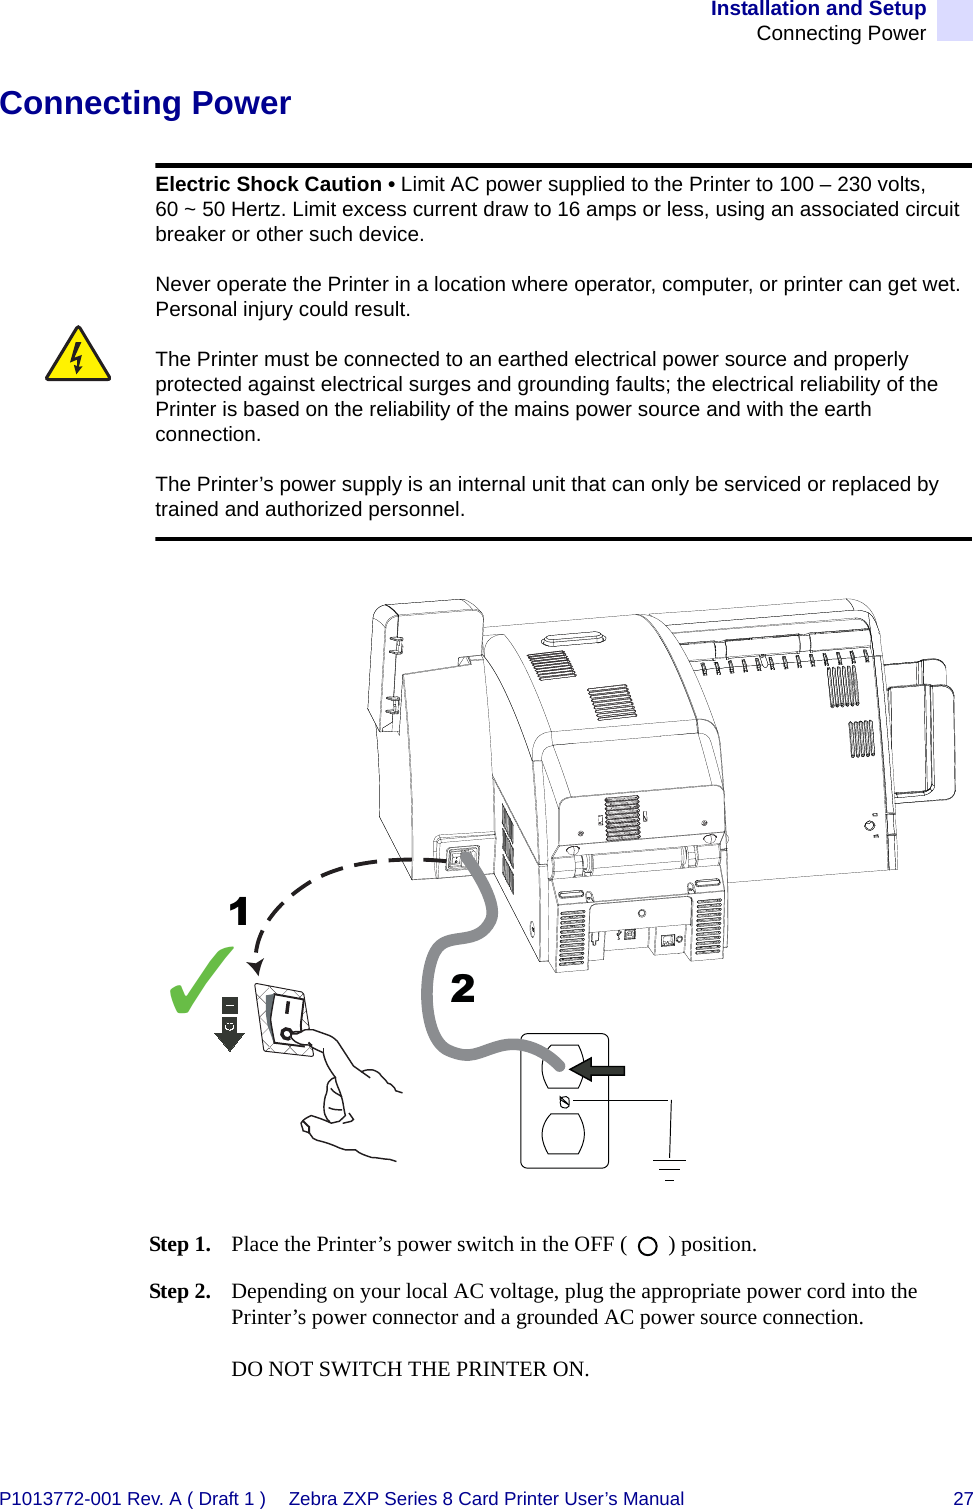 Installation and SetupConnecting PowerP1013772-001 Rev. A ( Draft 1 ) Zebra ZXP Series 8 Card Printer User’s Manual 27Connecting PowerStep 1. Place the Printer’s power switch in the OFF (   ) position.Step 2. Depending on your local AC voltage, plug the appropriate power cord into the Printer’s power connector and a grounded AC power source connection.DO NOT SWITCH THE PRINTER ON.Electric Shock Caution • Limit AC power supplied to the Printer to 100 – 230 volts, 60 ~ 50 Hertz. Limit excess current draw to 16 amps or less, using an associated circuit breaker or other such device. Never operate the Printer in a location where operator, computer, or printer can get wet. Personal injury could result. The Printer must be connected to an earthed electrical power source and properly protected against electrical surges and grounding faults; the electrical reliability of the Printer is based on the reliability of the mains power source and with the earth connection.The Printer’s power supply is an internal unit that can only be serviced or replaced by trained and authorized personnel.✓12